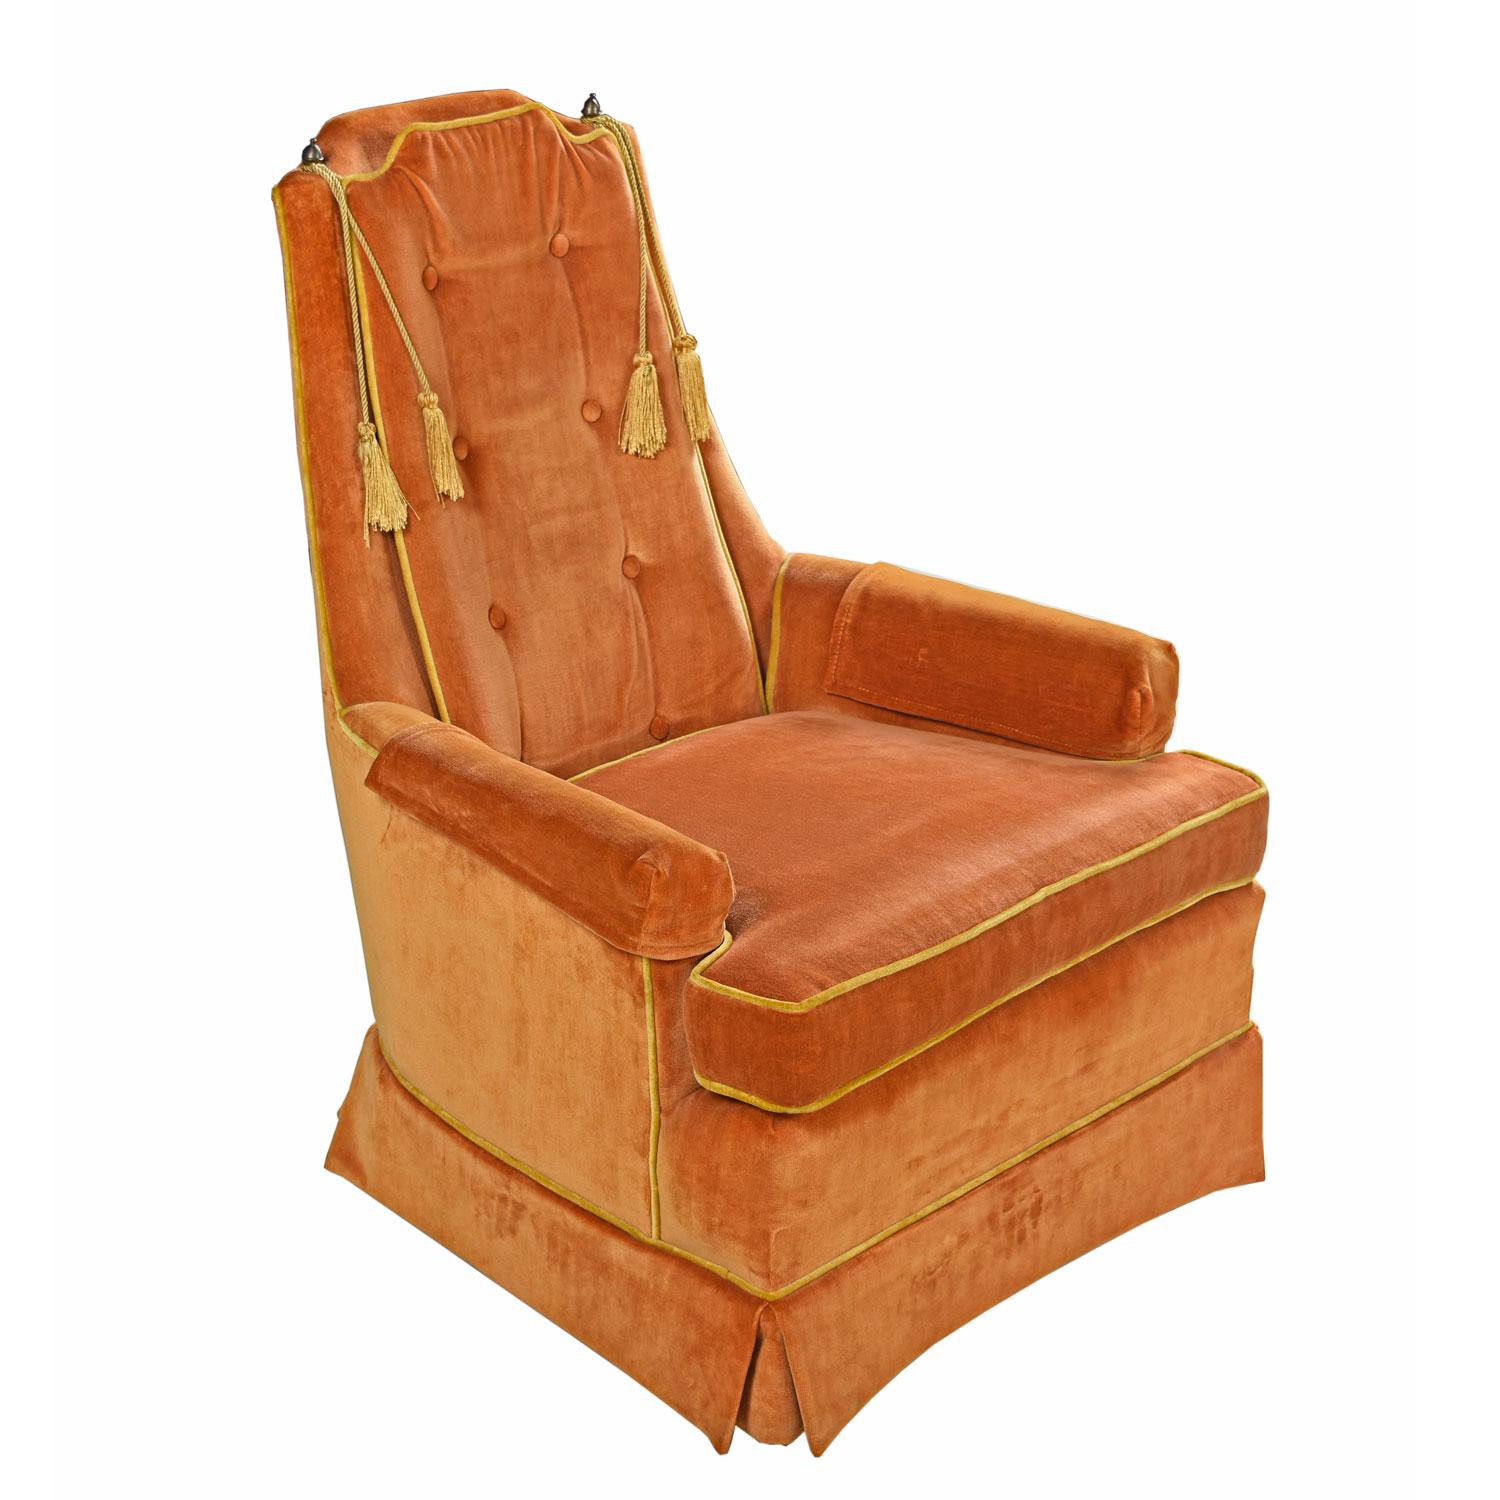 Near mint high back lounge chairs. The peach (yellow orange) velvet velour fabric exemplifies the period. These velvet arm chairs are so citrusy you'll want to bite into them. To top it off, they're embellished with gold piping and tassels tied to